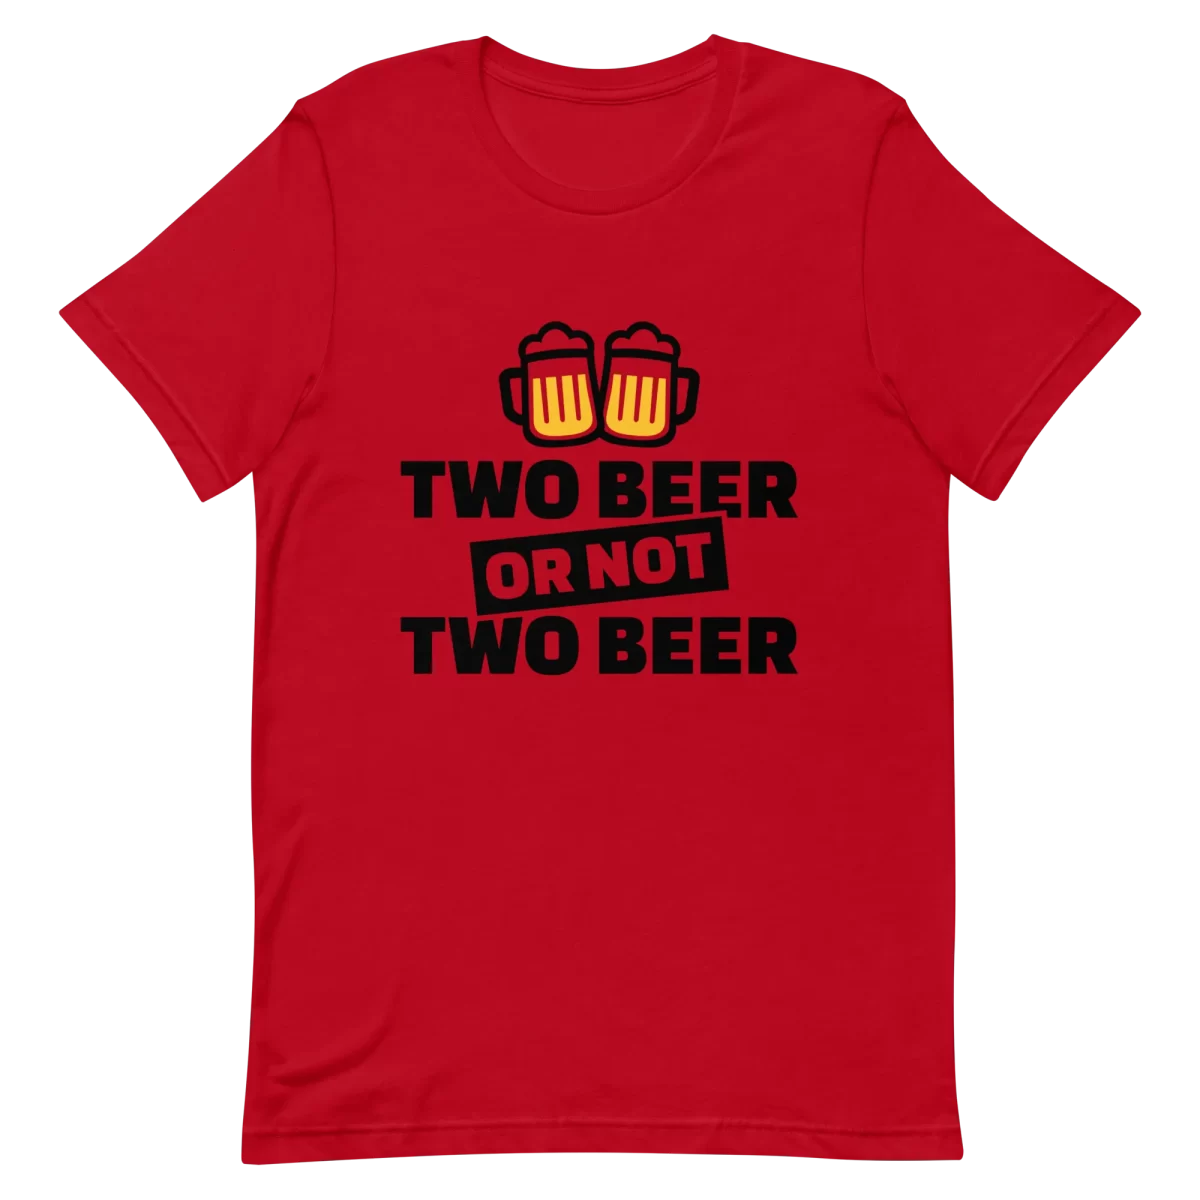 Unisex T-Shirt - Two Beer or Not to Beer - Red